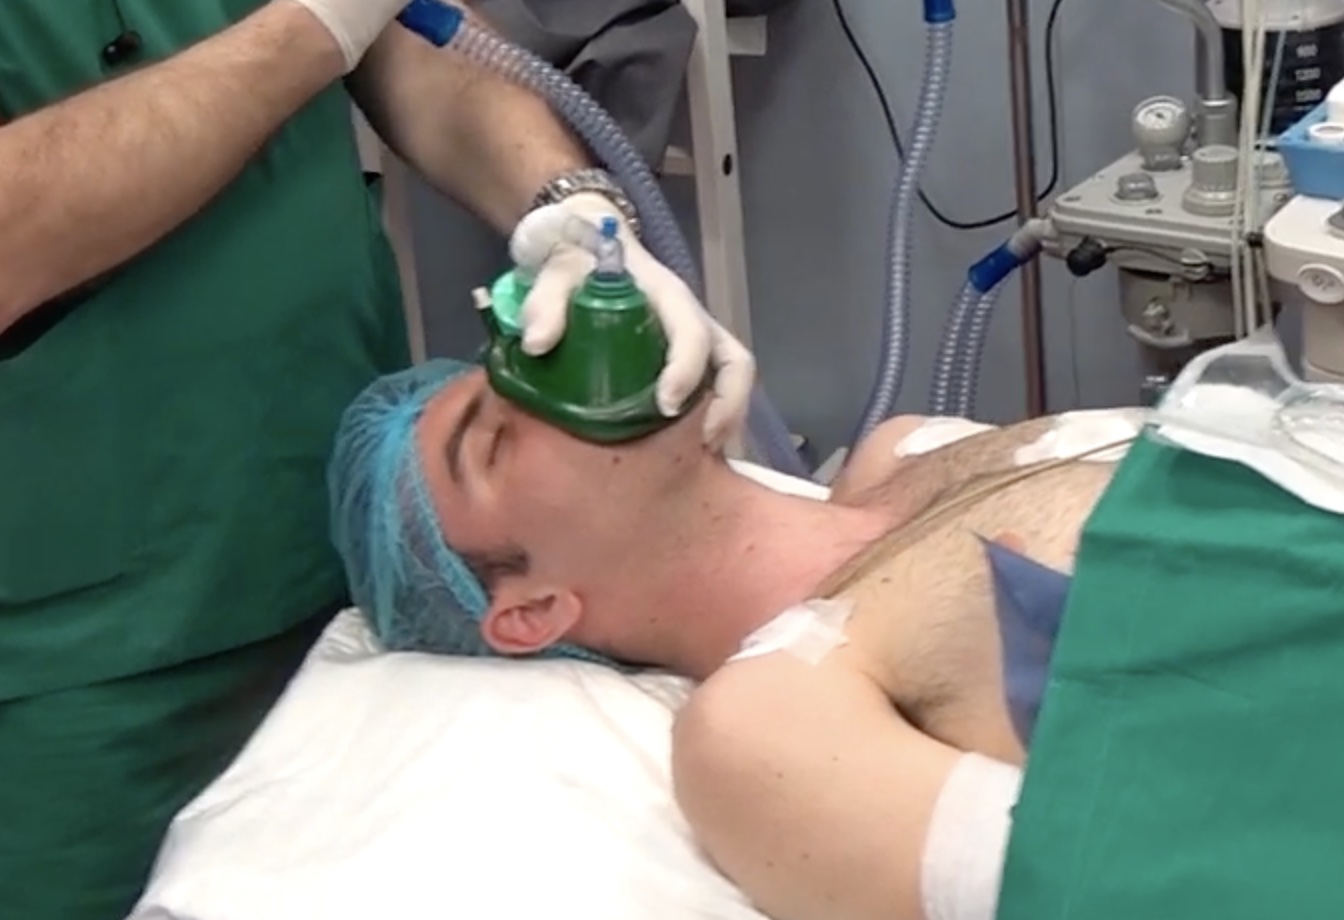 Anesthesia Mask Fetish Porn - Anesthesia: Greek Man Anesthesia and Intubation - ThisVid.com